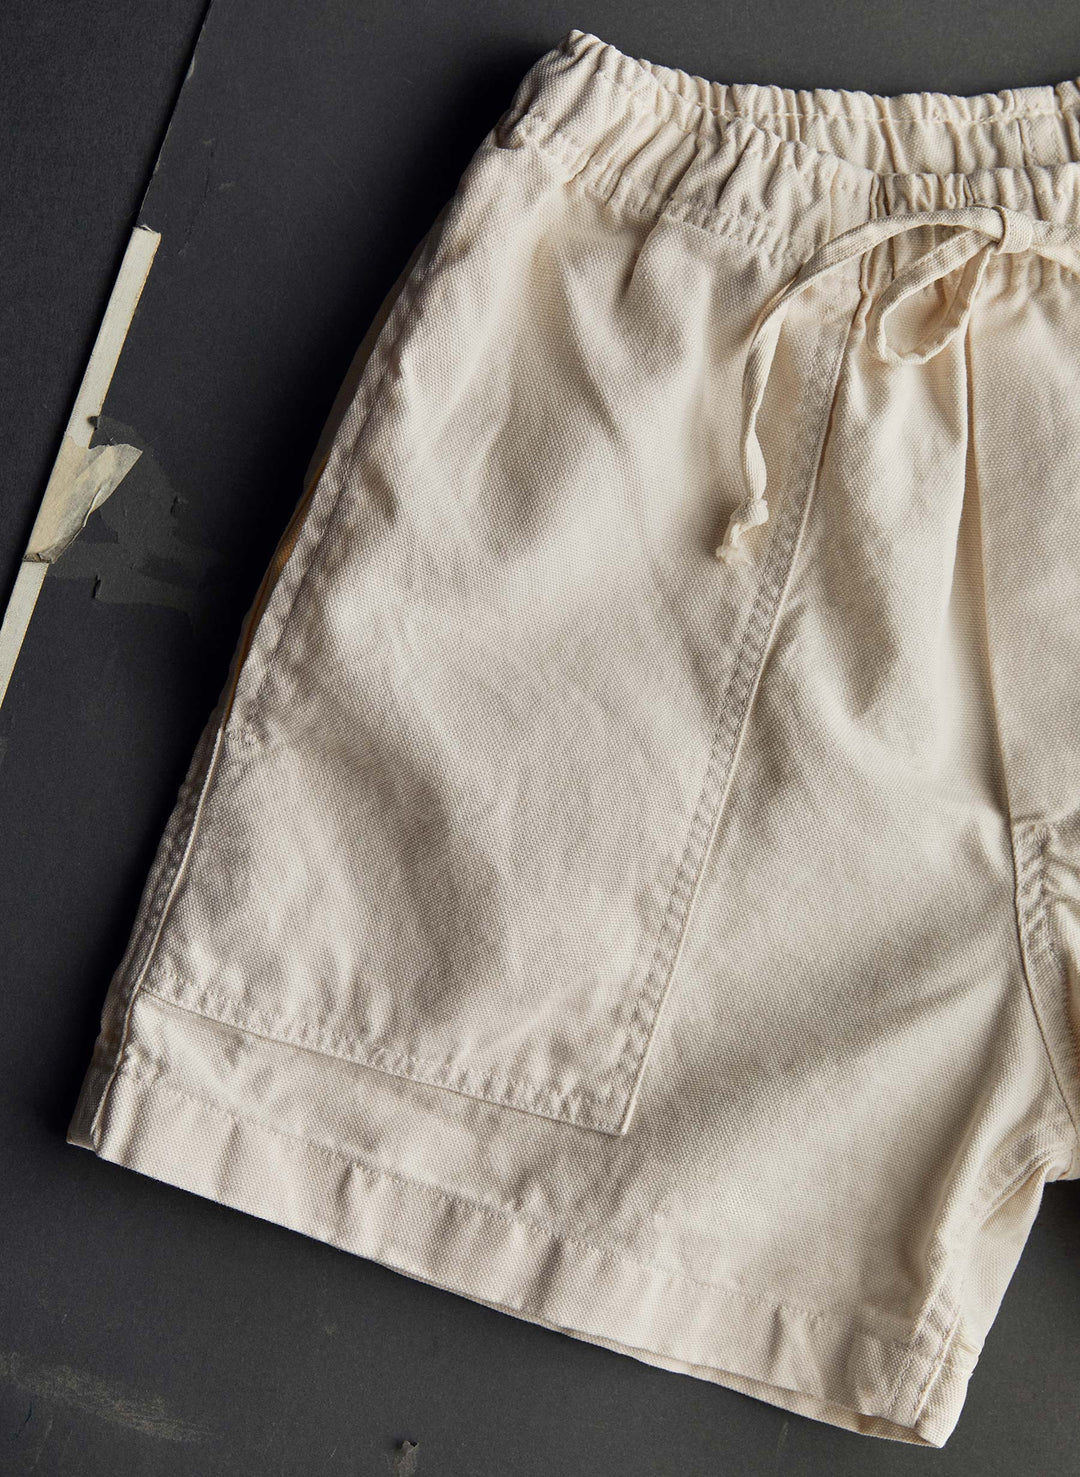 a close up of a pair of shorts